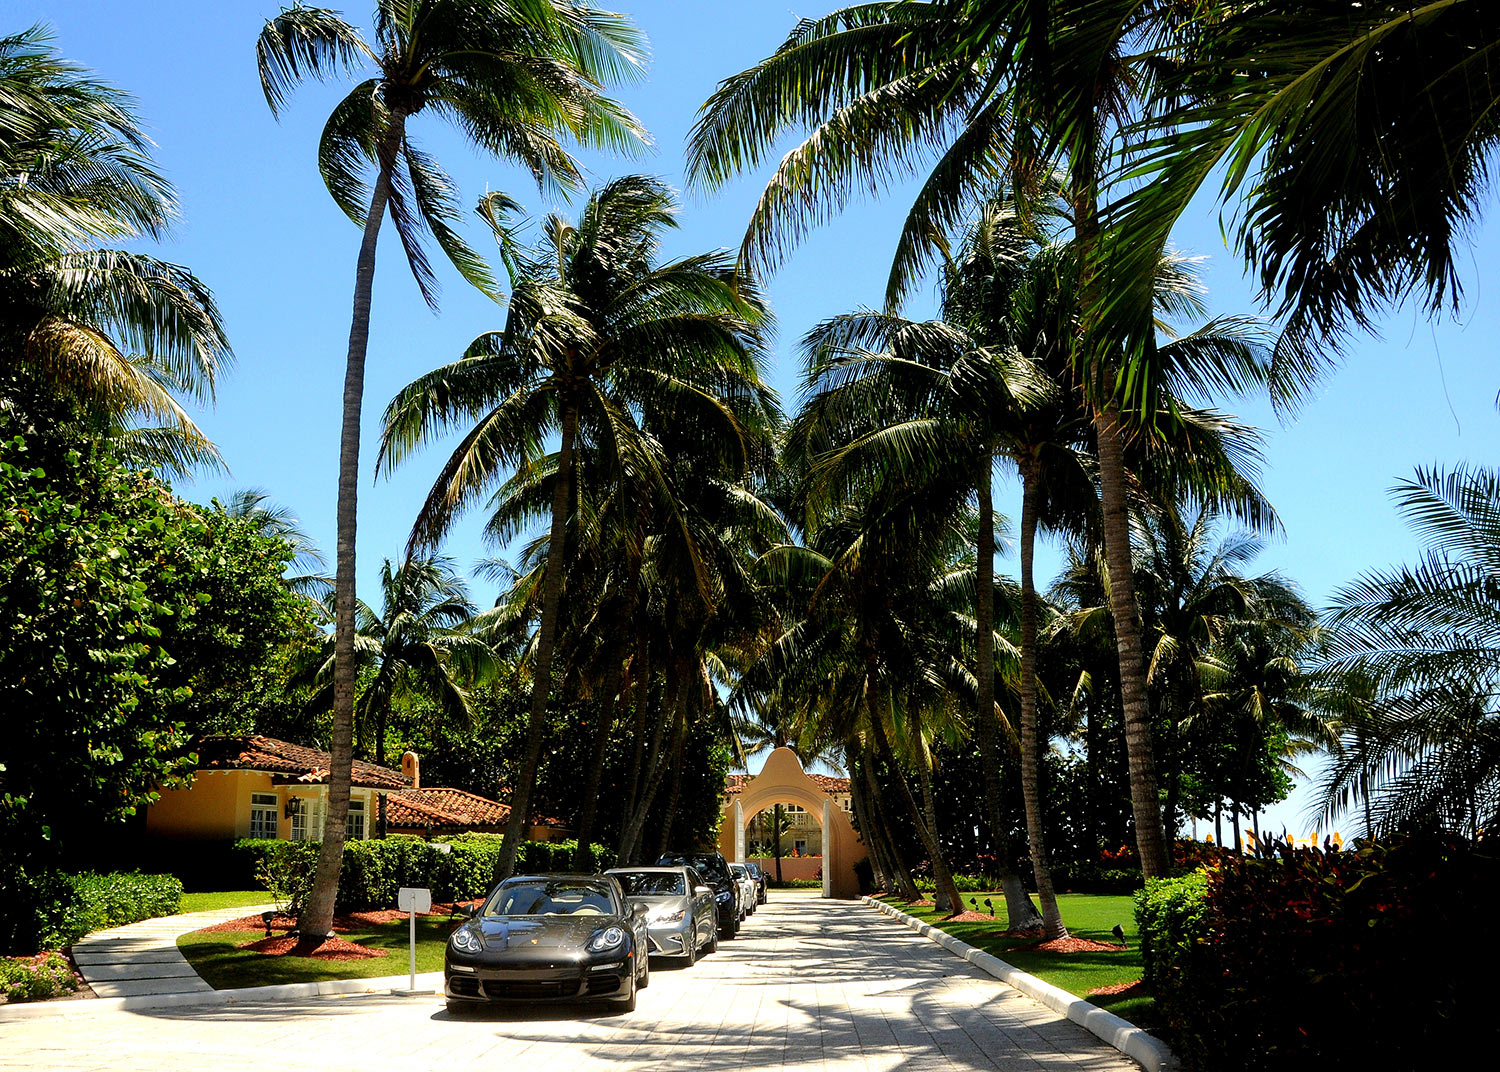 Sports cars line a driveway at President Donald Trump’s Mar-a-Lago resort in Palm Beach, Florida.